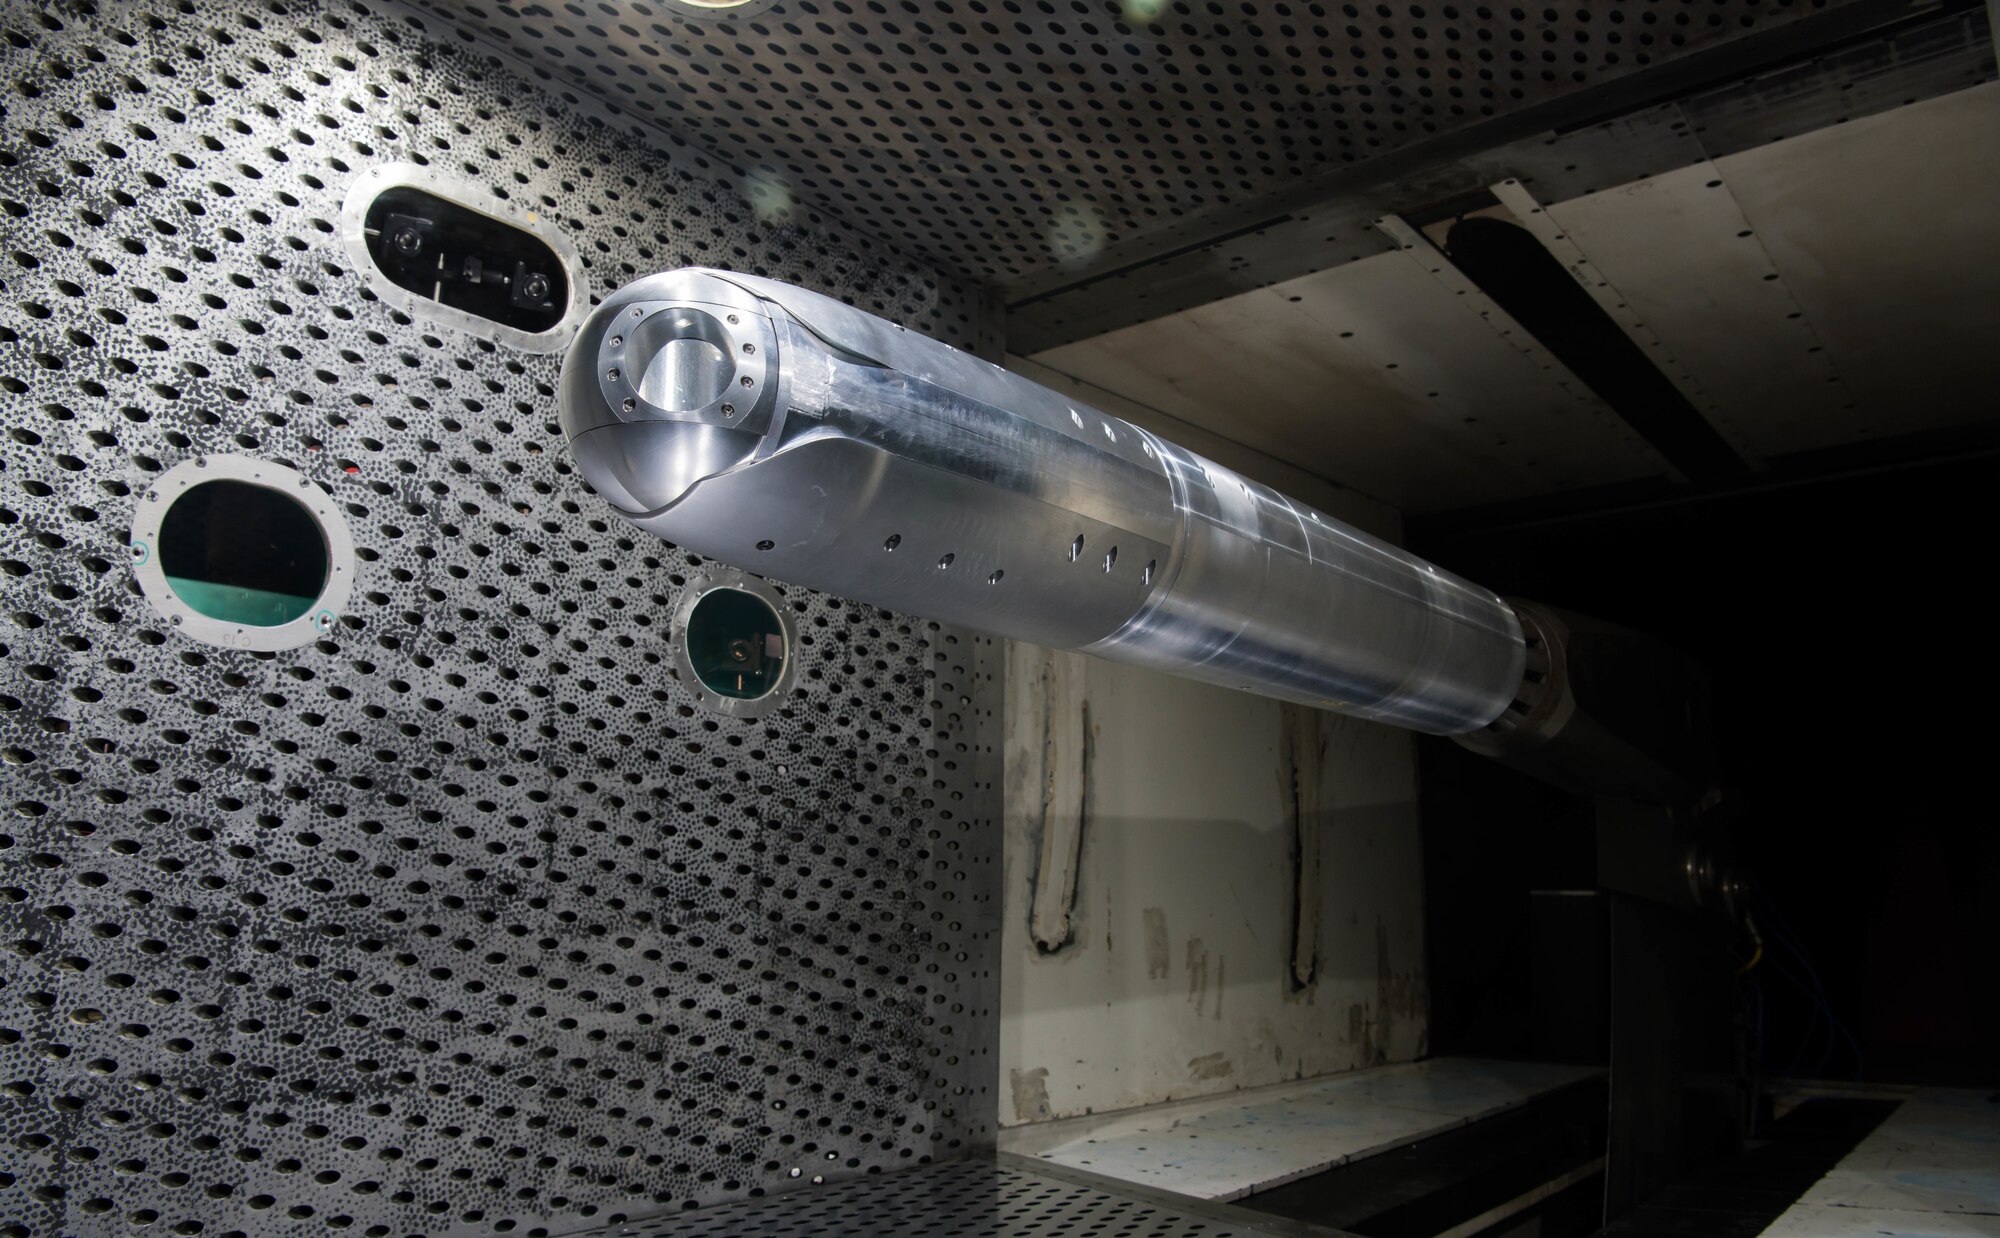 A directed energy (DE) system turret is positioned on a sting in the 4-foot transonic wind tunnel at Arnold Air Force Base for testing by the Aerodynamics Test Branch of Arnold Engineering Development Complex, March 5, 2021. Wind tunnel testing allows system developers to see the impact of airflow disturbances on the DE beam. (U.S. Air Force photo by Jill Pickett)